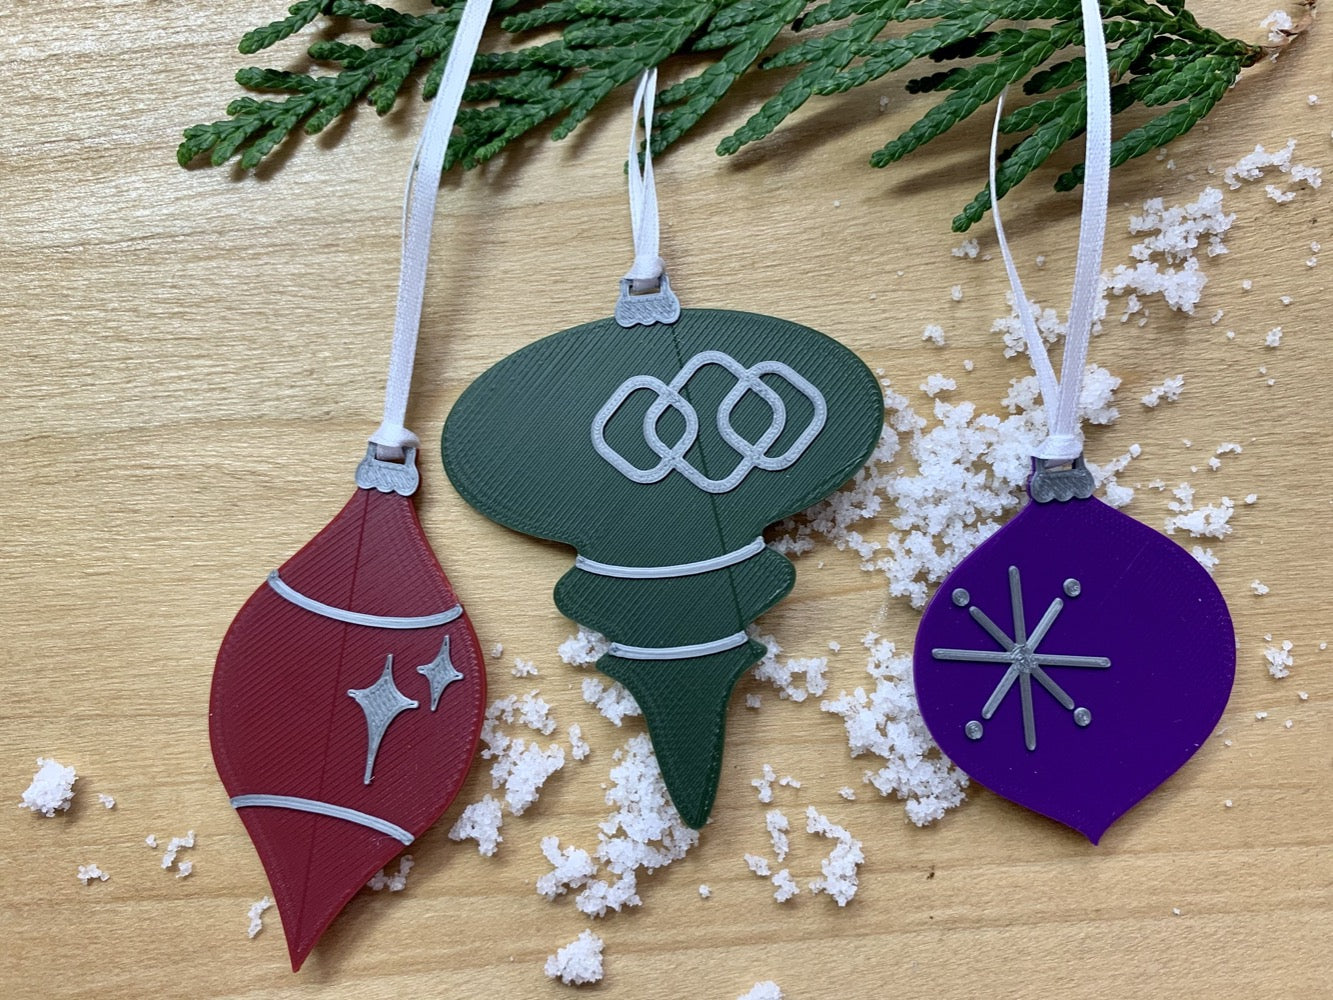 On a wood background with white snow and hanging from an every green branch are a set of 3 R+D 3D printed ornaments. They are all designed to look like vintage baubles that would have commonly been found on Christmas trees in the past. They each have silver accents of stars and shapes. One is merlot red, one is dark green, and one is purple.